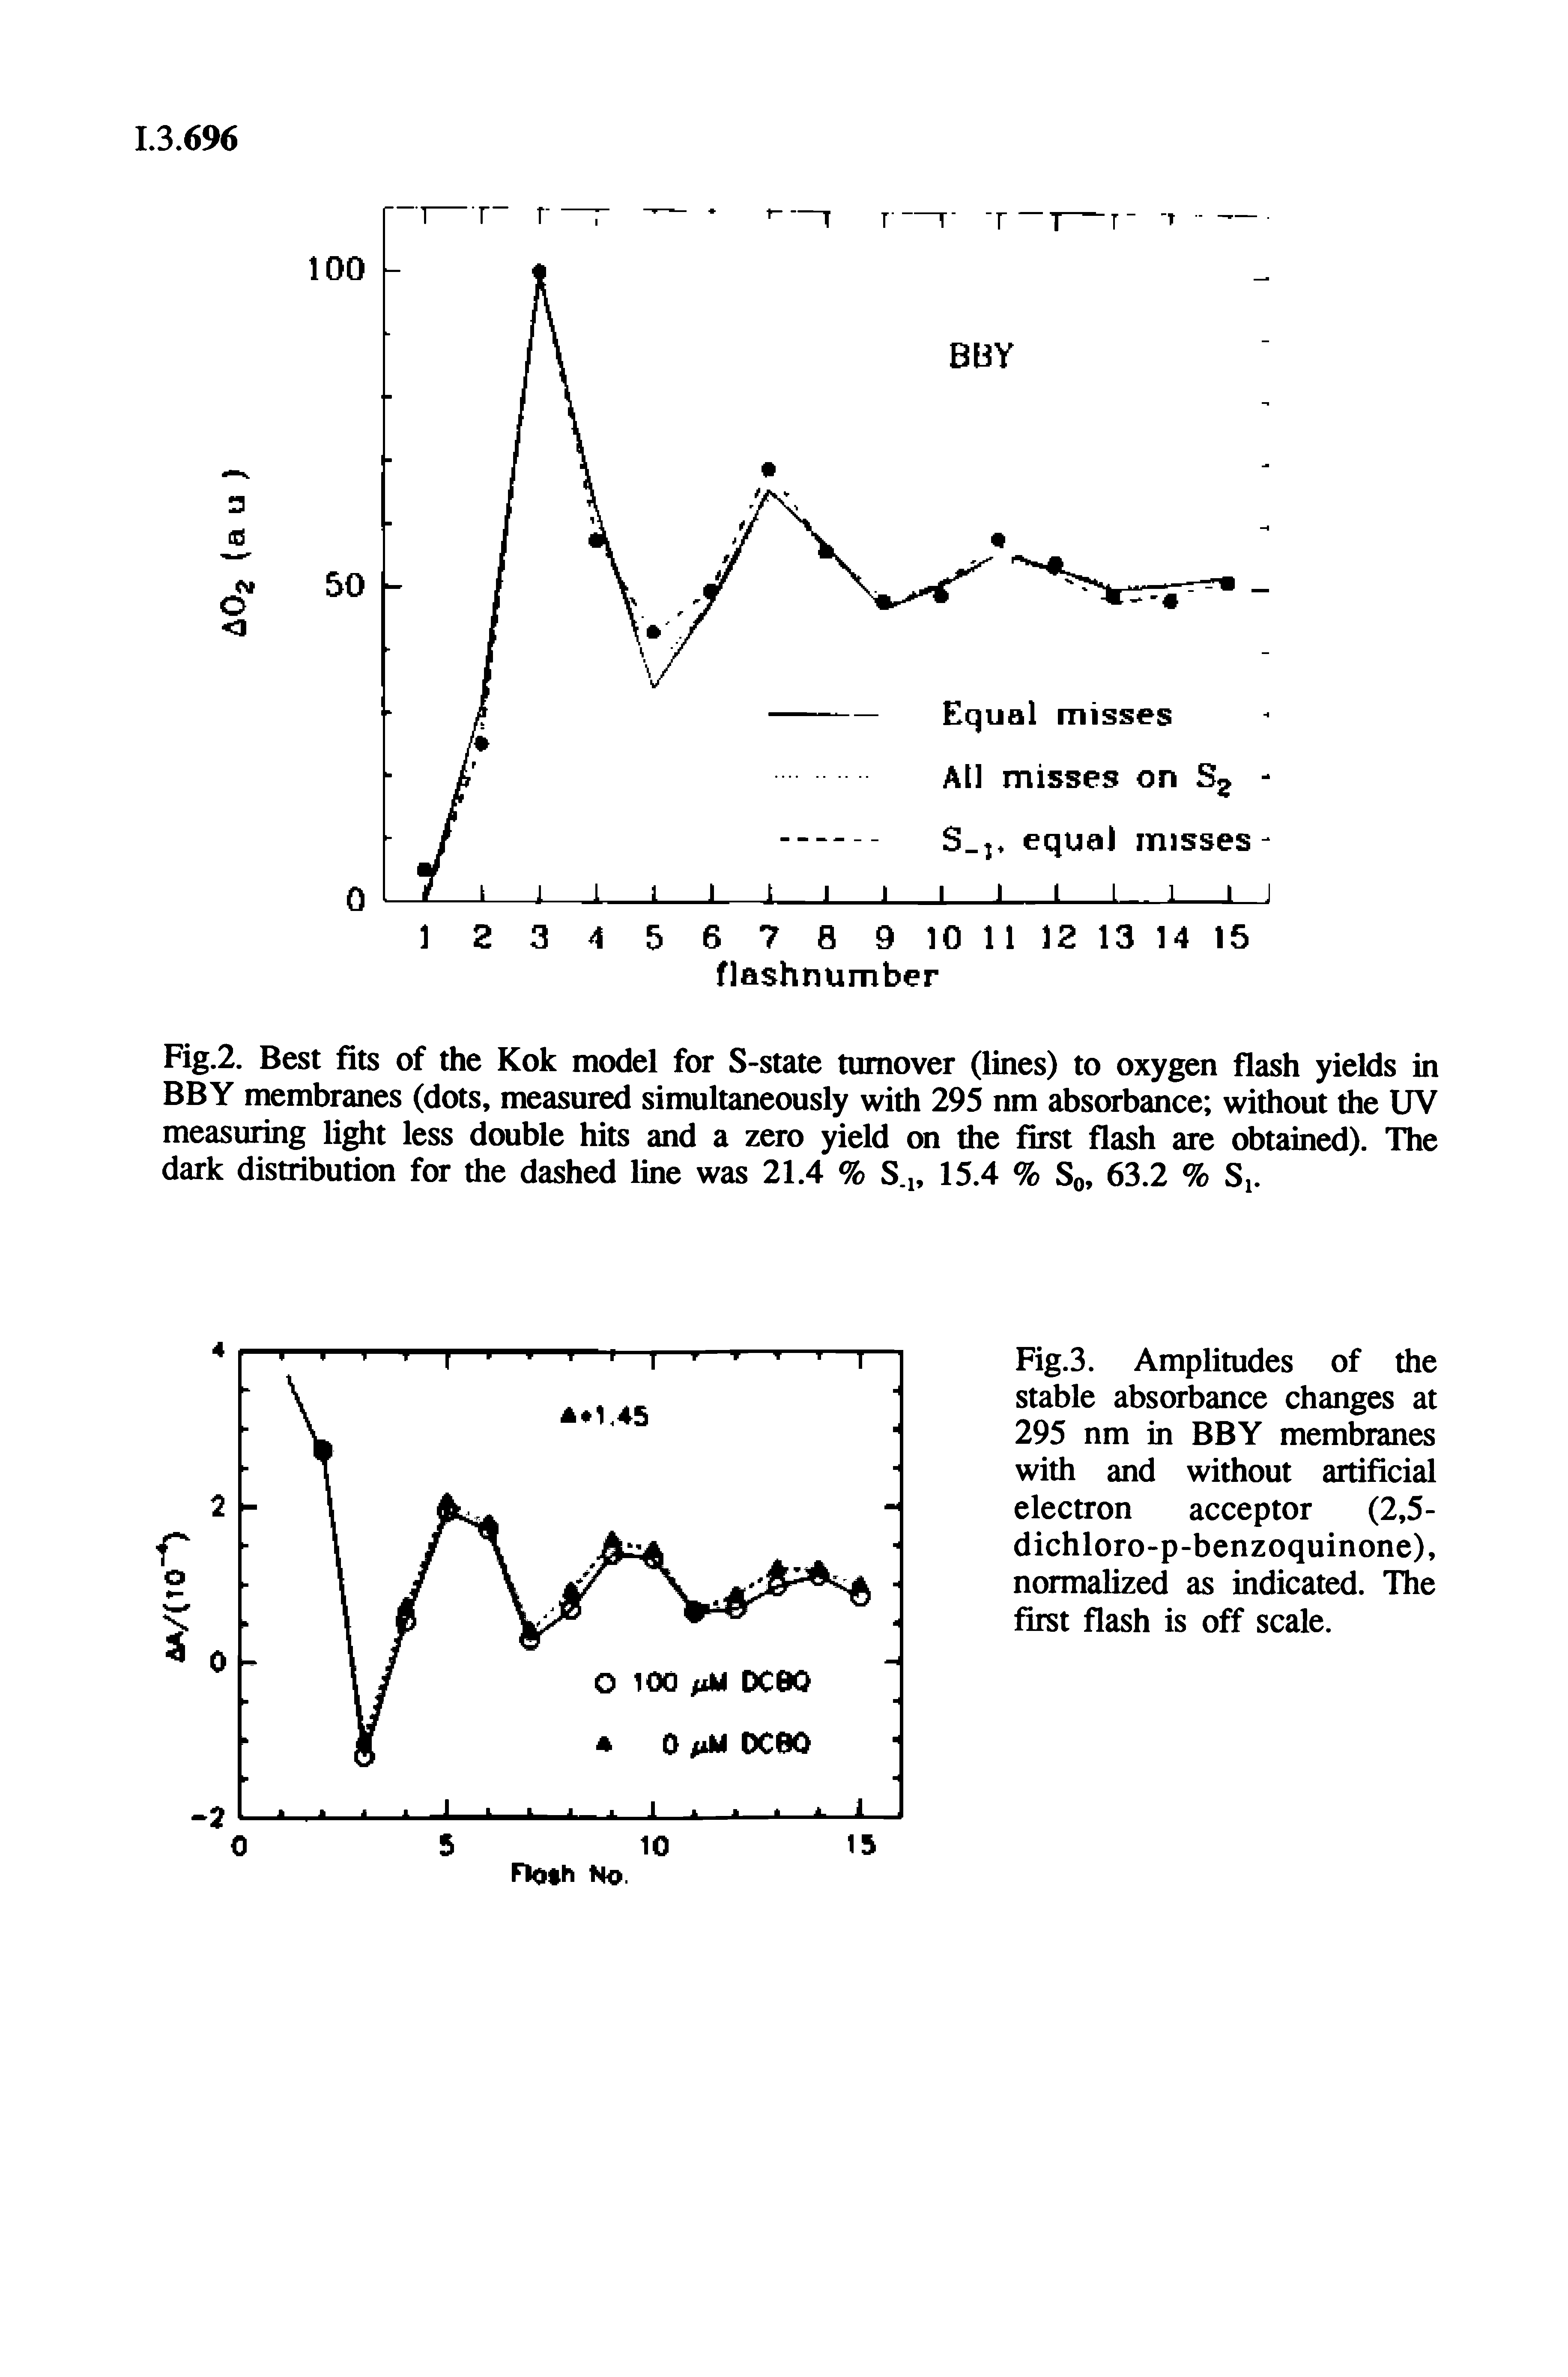 Fig.3. Amplitudes of the stable absorbance changes at 295 nm in BBY membranes with and without artificial electron acceptor (2,5-dichloro-p-benzoquinone), normalized as indicated. The first flash is off scale.